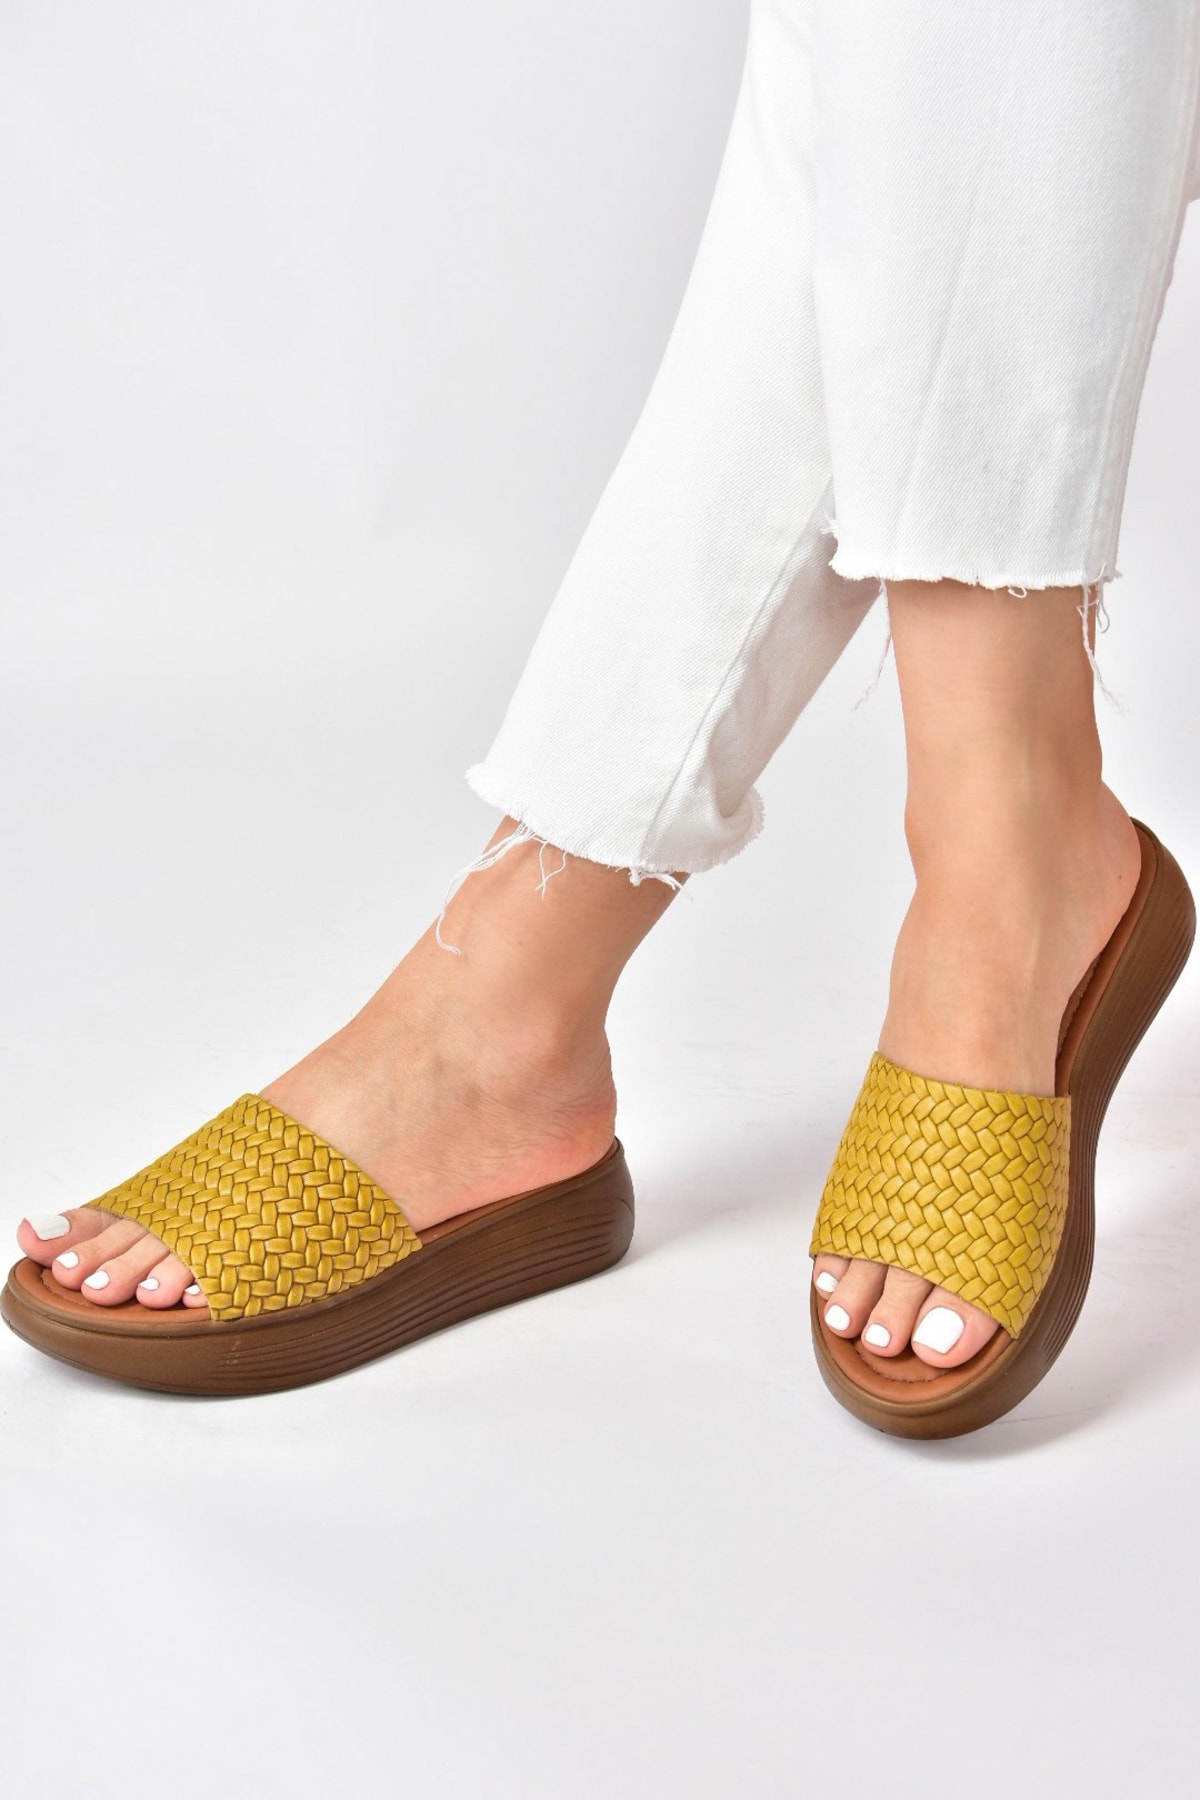 Levně Fox Shoes Yellow Genuine Leather Women's Thick Banded Knitted Model Daily Slippers